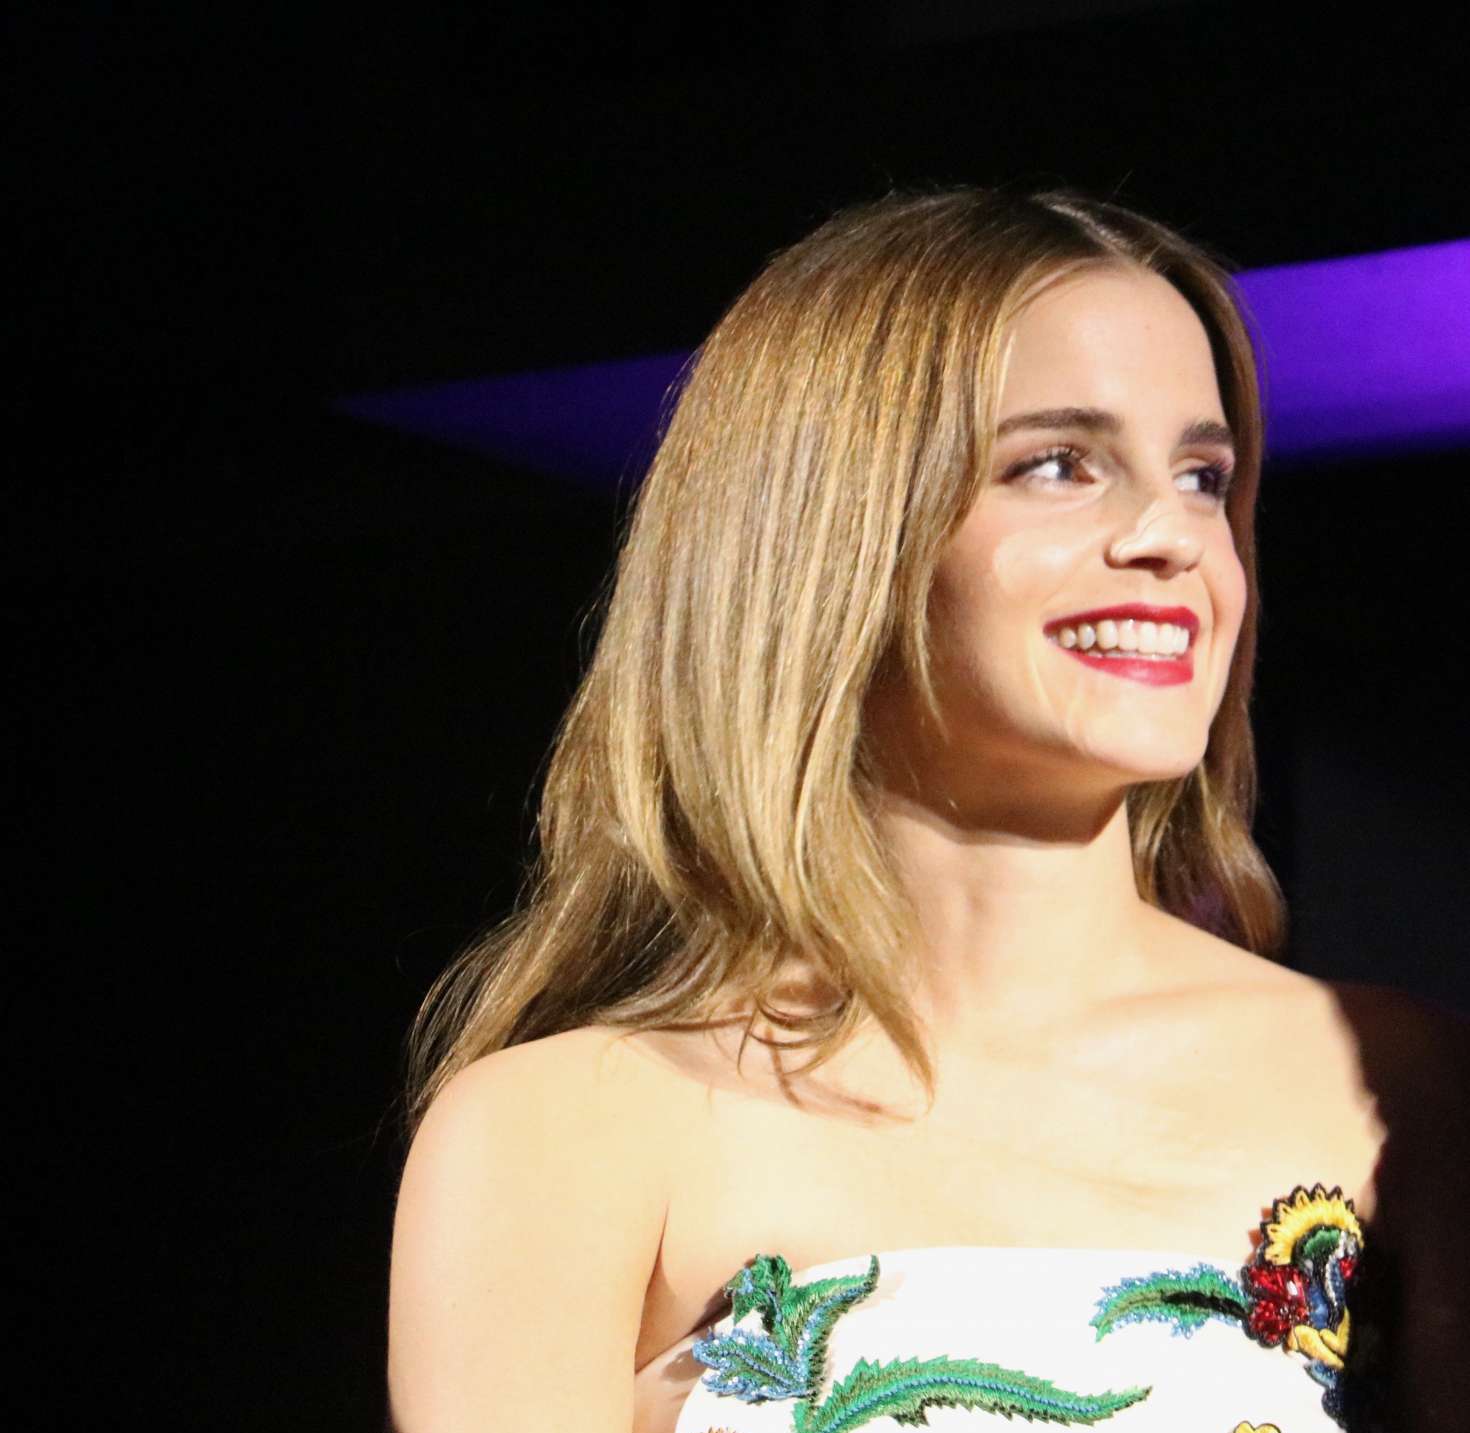 Emma Watson Looks Fantastic and Joyful at the Movie Premiere and Conference